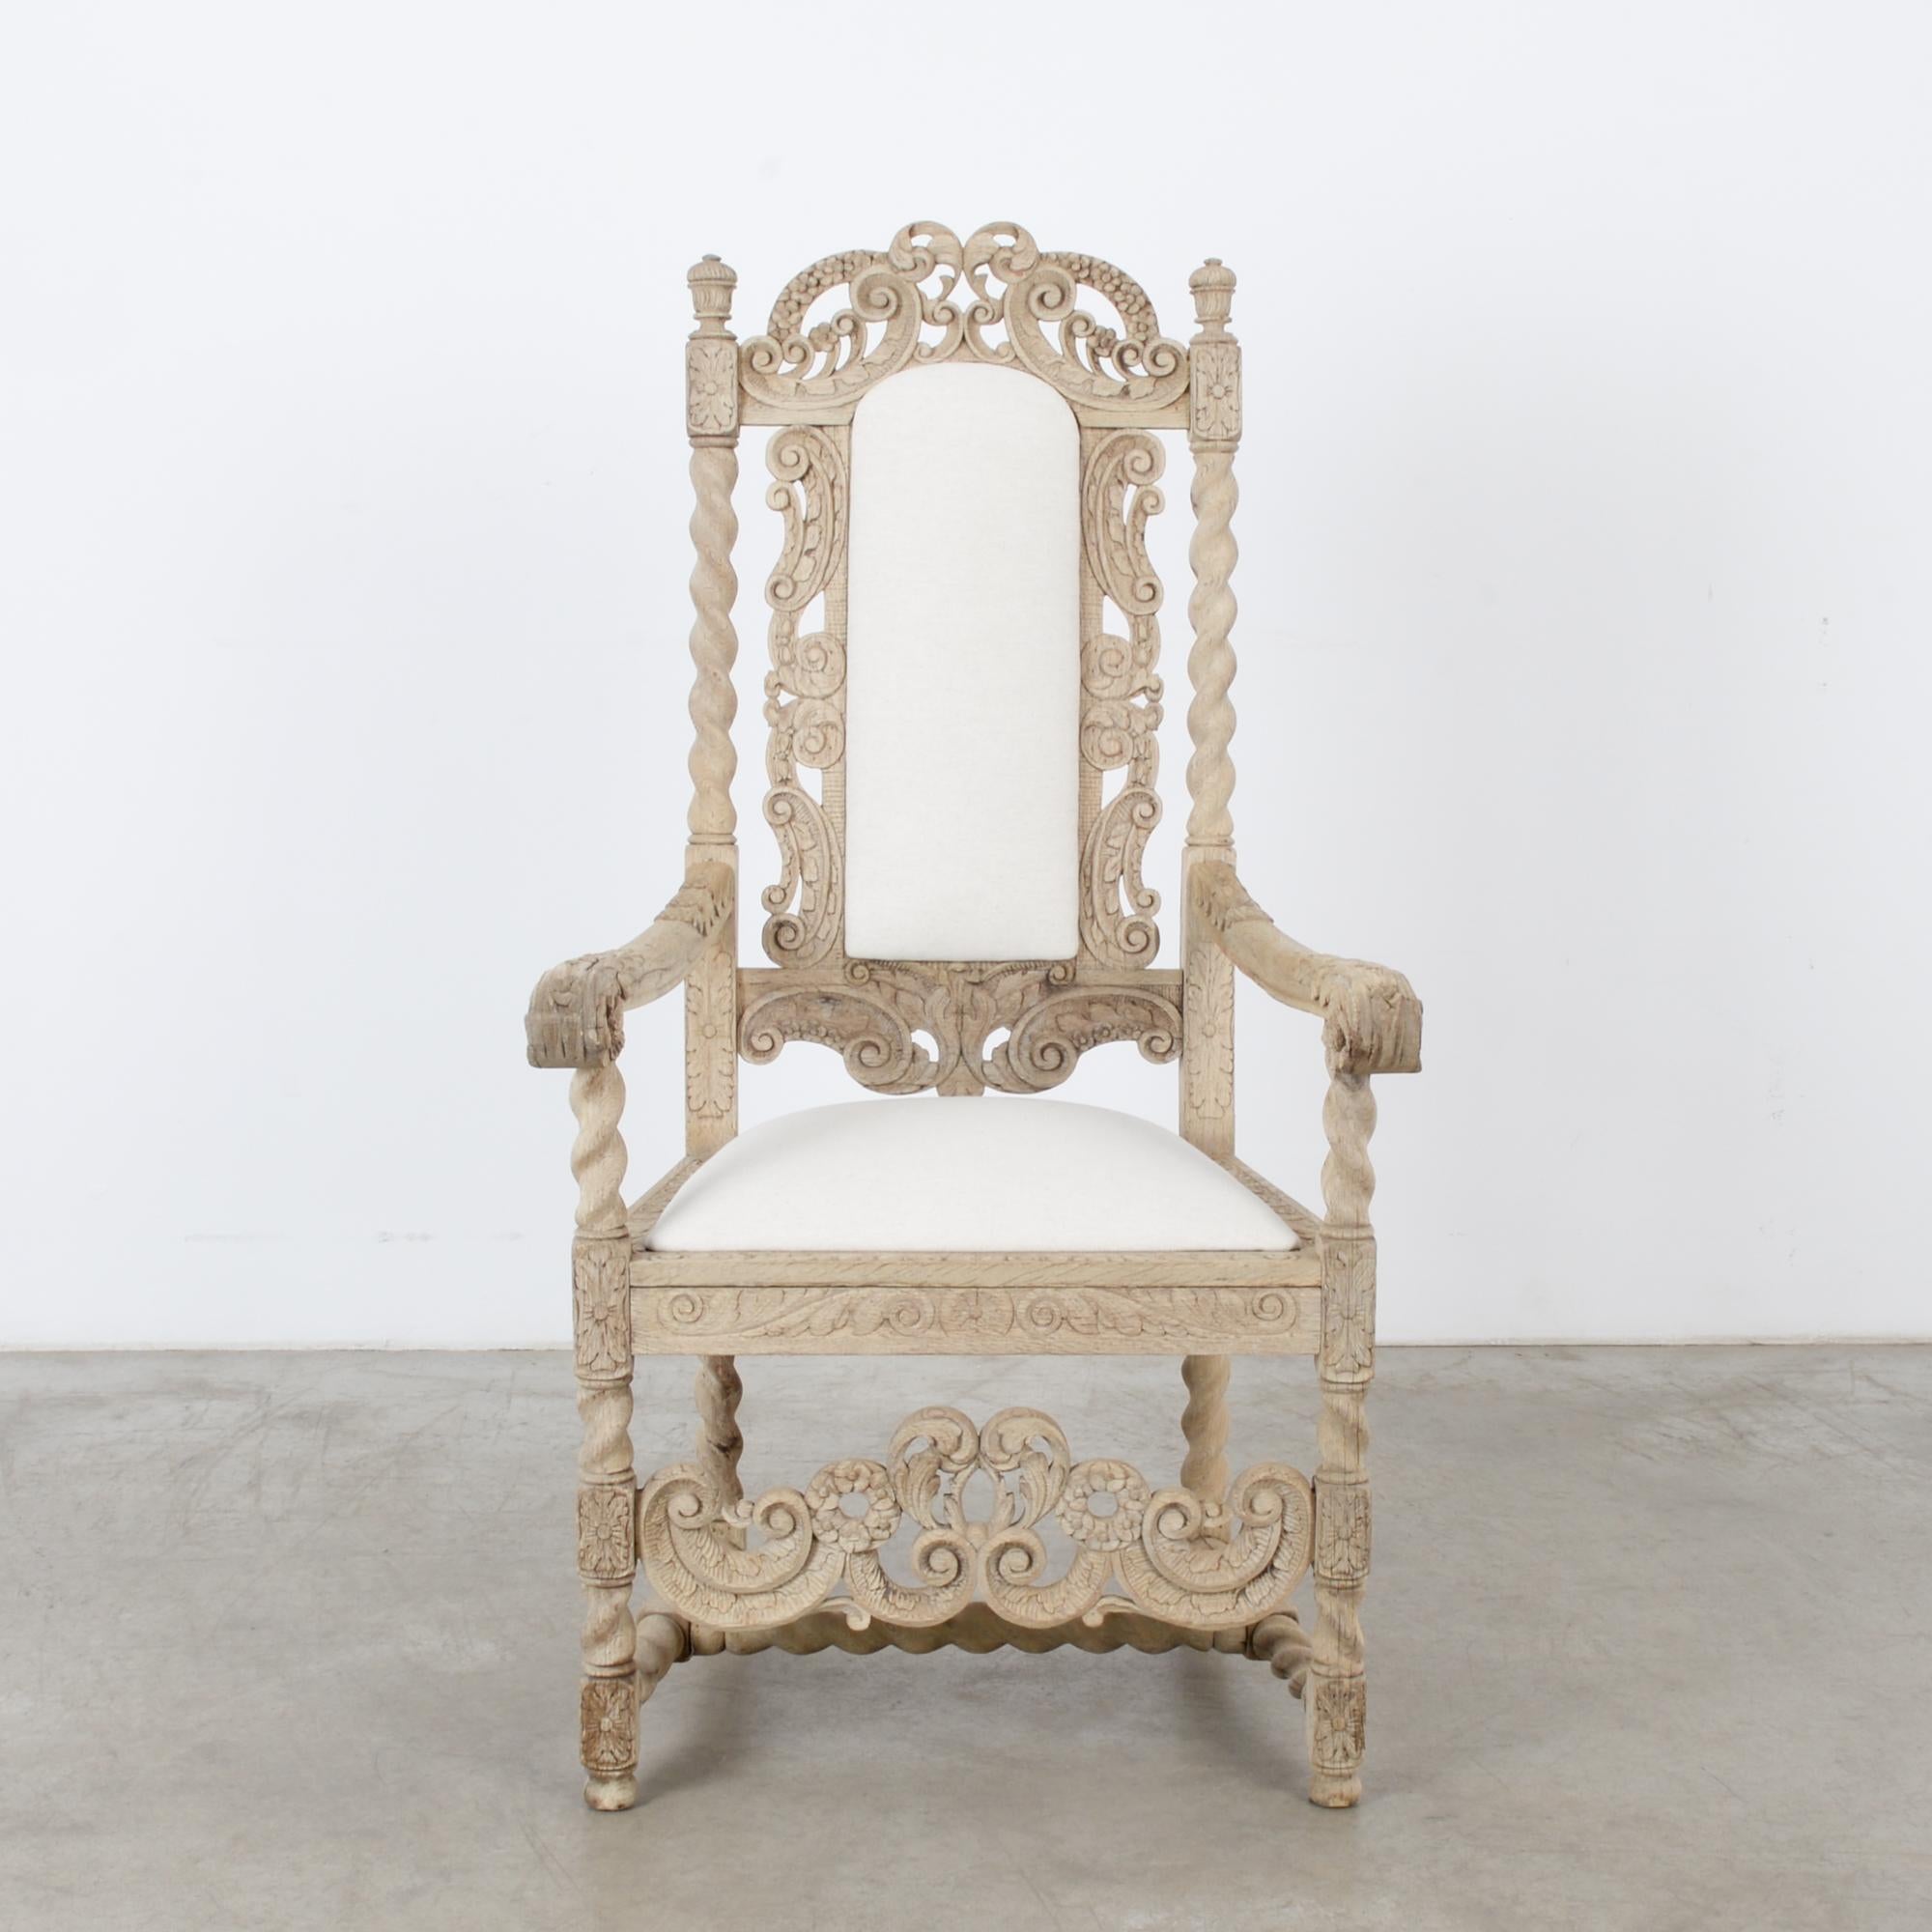 A bleached oak armchair with an upholstered seat and backrest from France, circa 1880s. The throne-like frame is embellished with elaborate carving. Twisted columns, leaves, flowers and berries abound among a lively interplay of scrolls. The light,